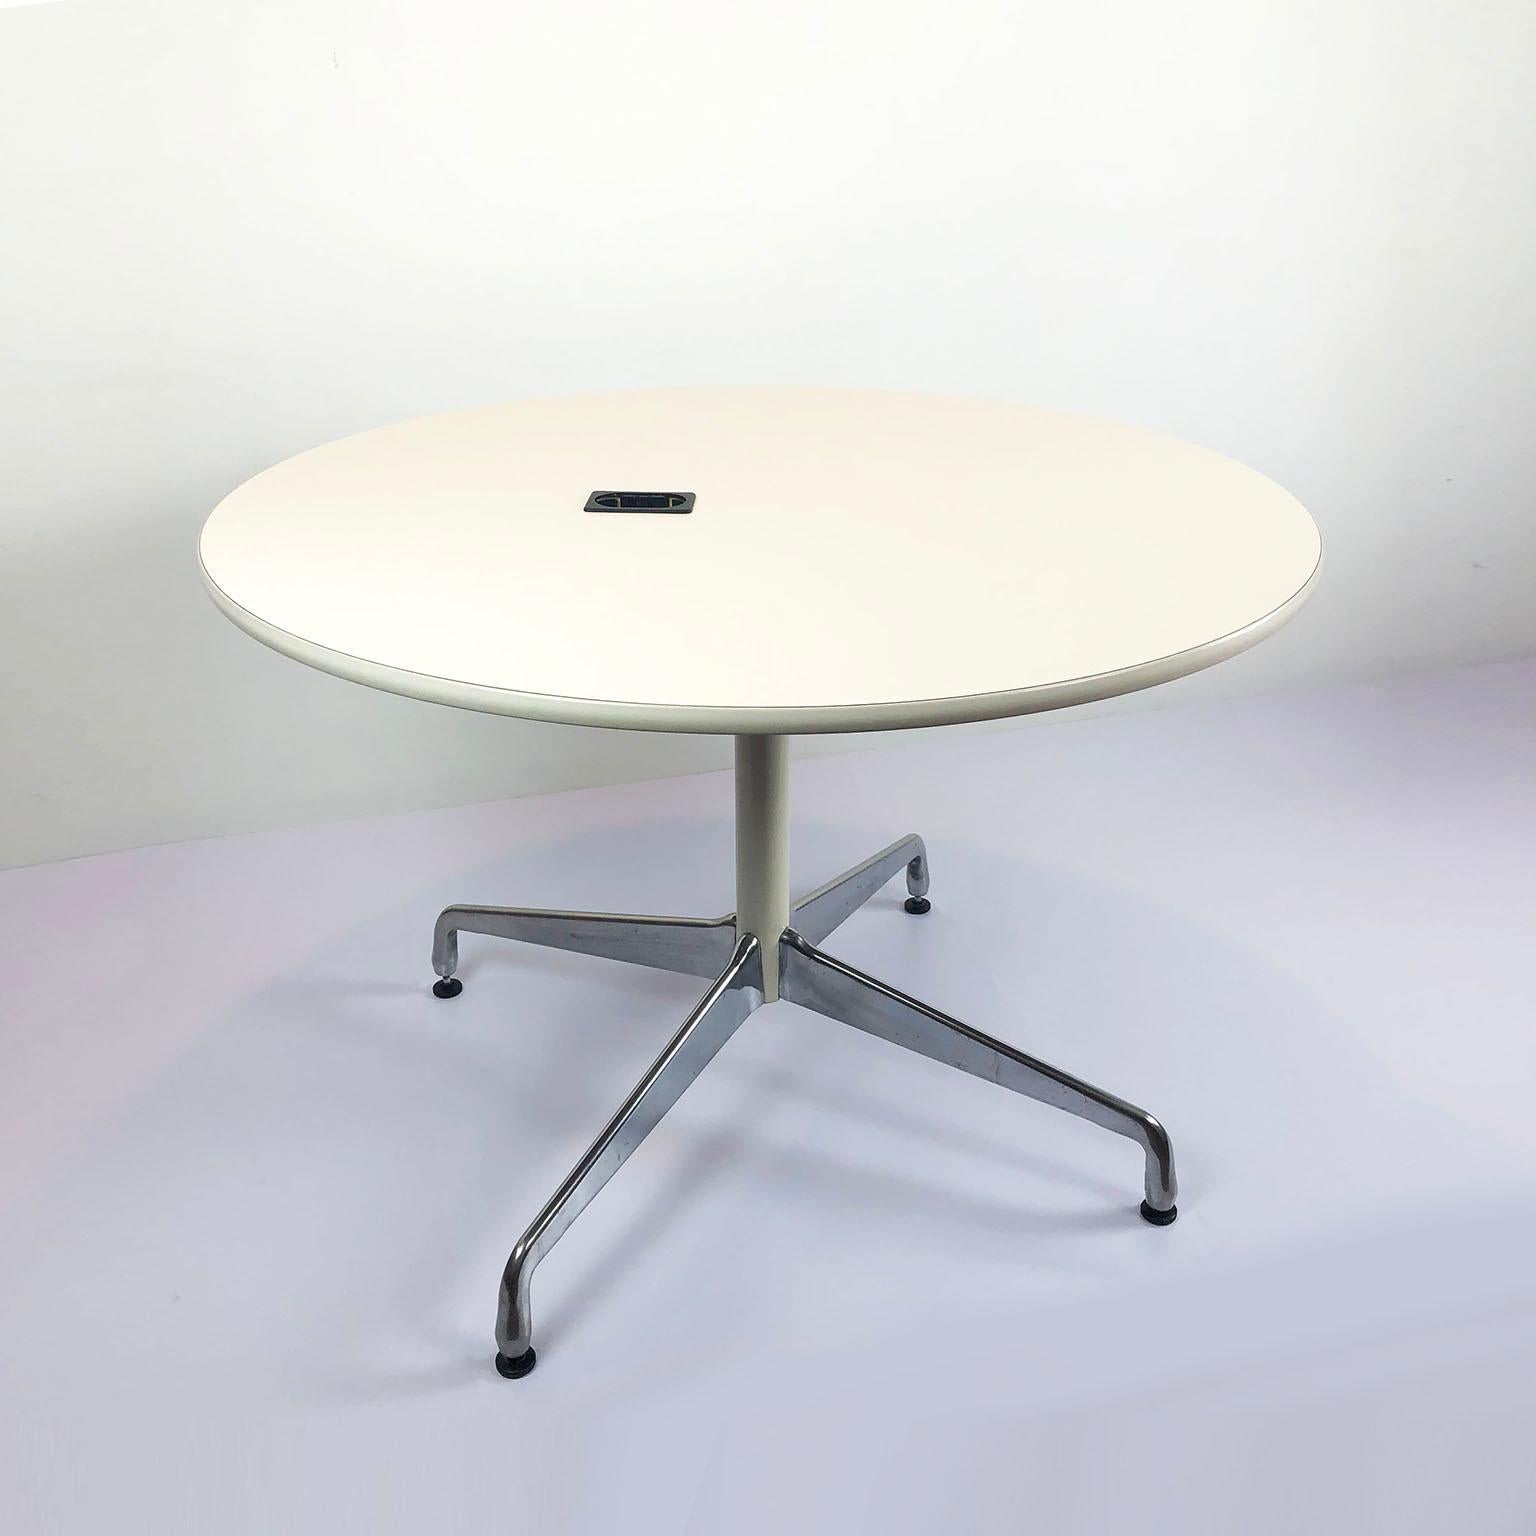 Designed by Charles and Ray Eames for Herman Miller Features aluminum star base with original label.